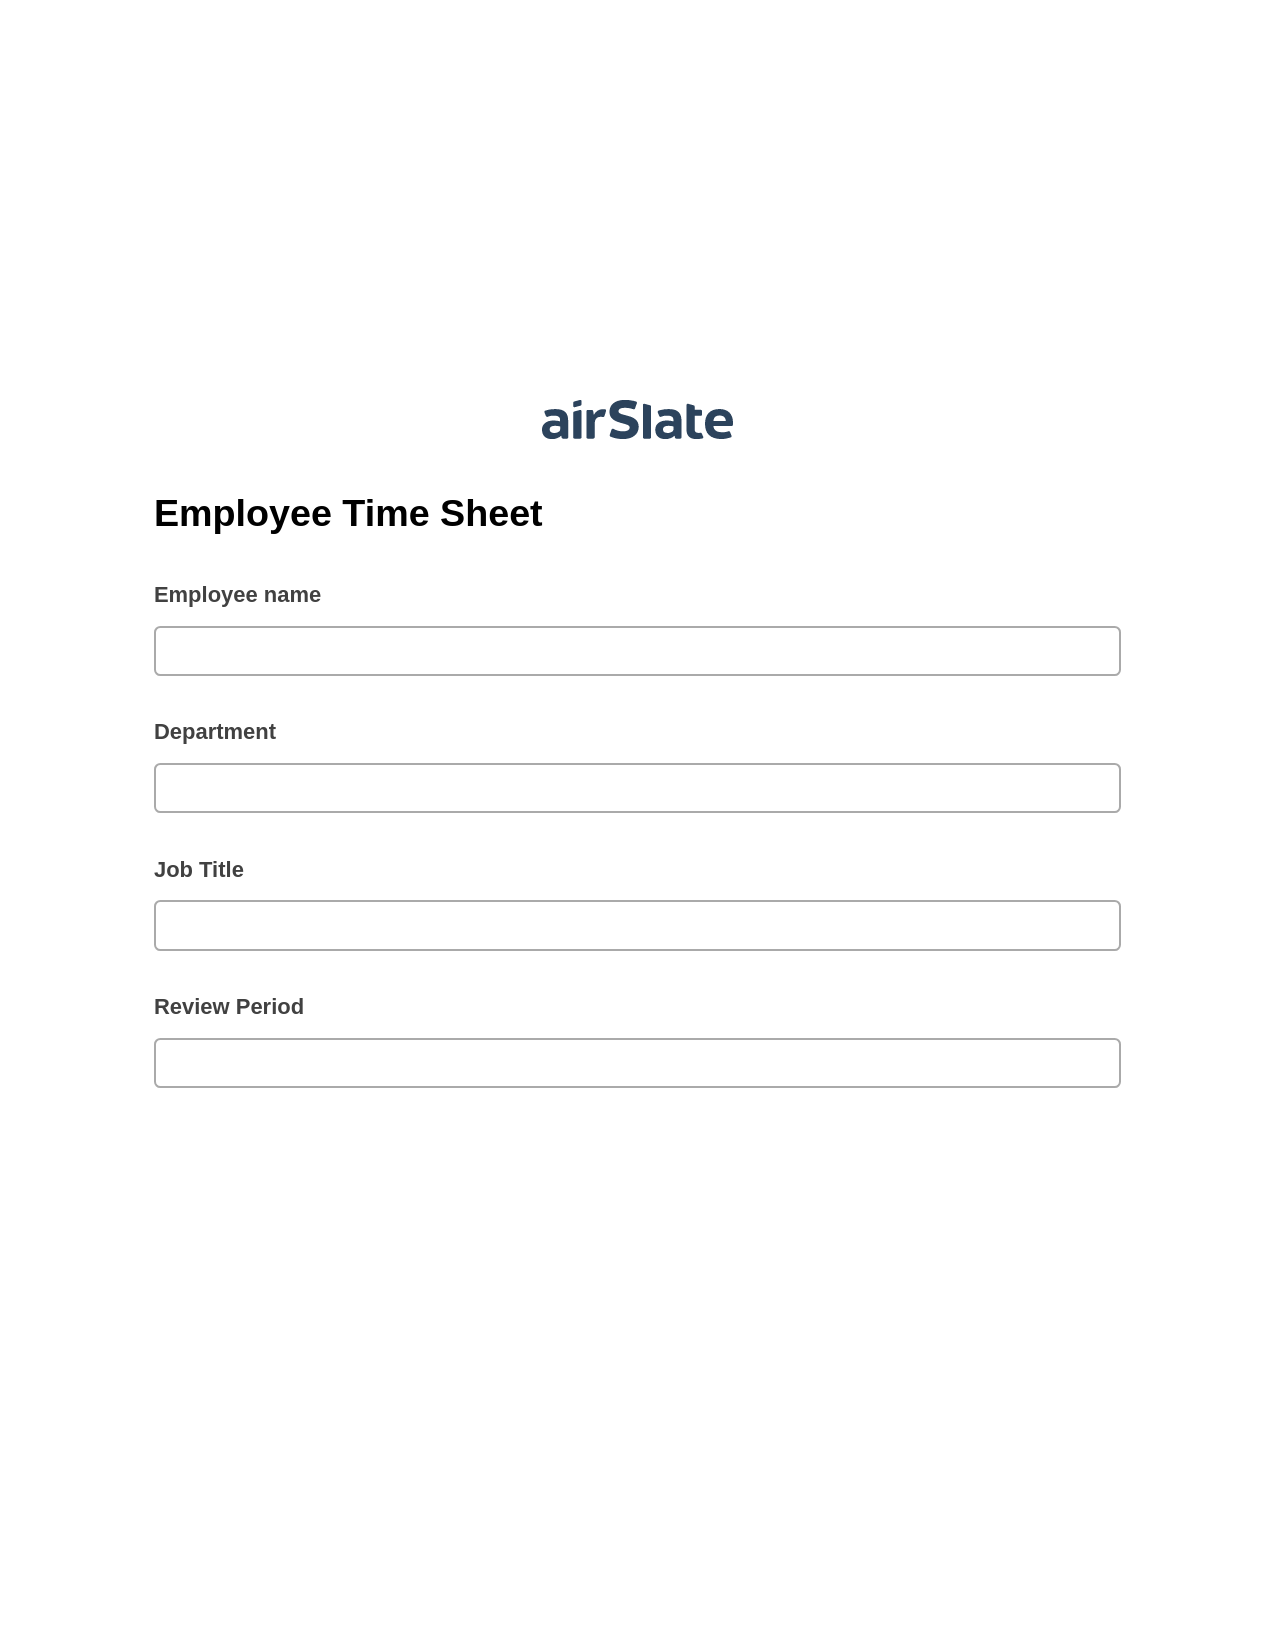 Employee Time Sheet Pre-fill Document Bot, Create Slate every Google Sheet Update Bot, Archive to Box Bot